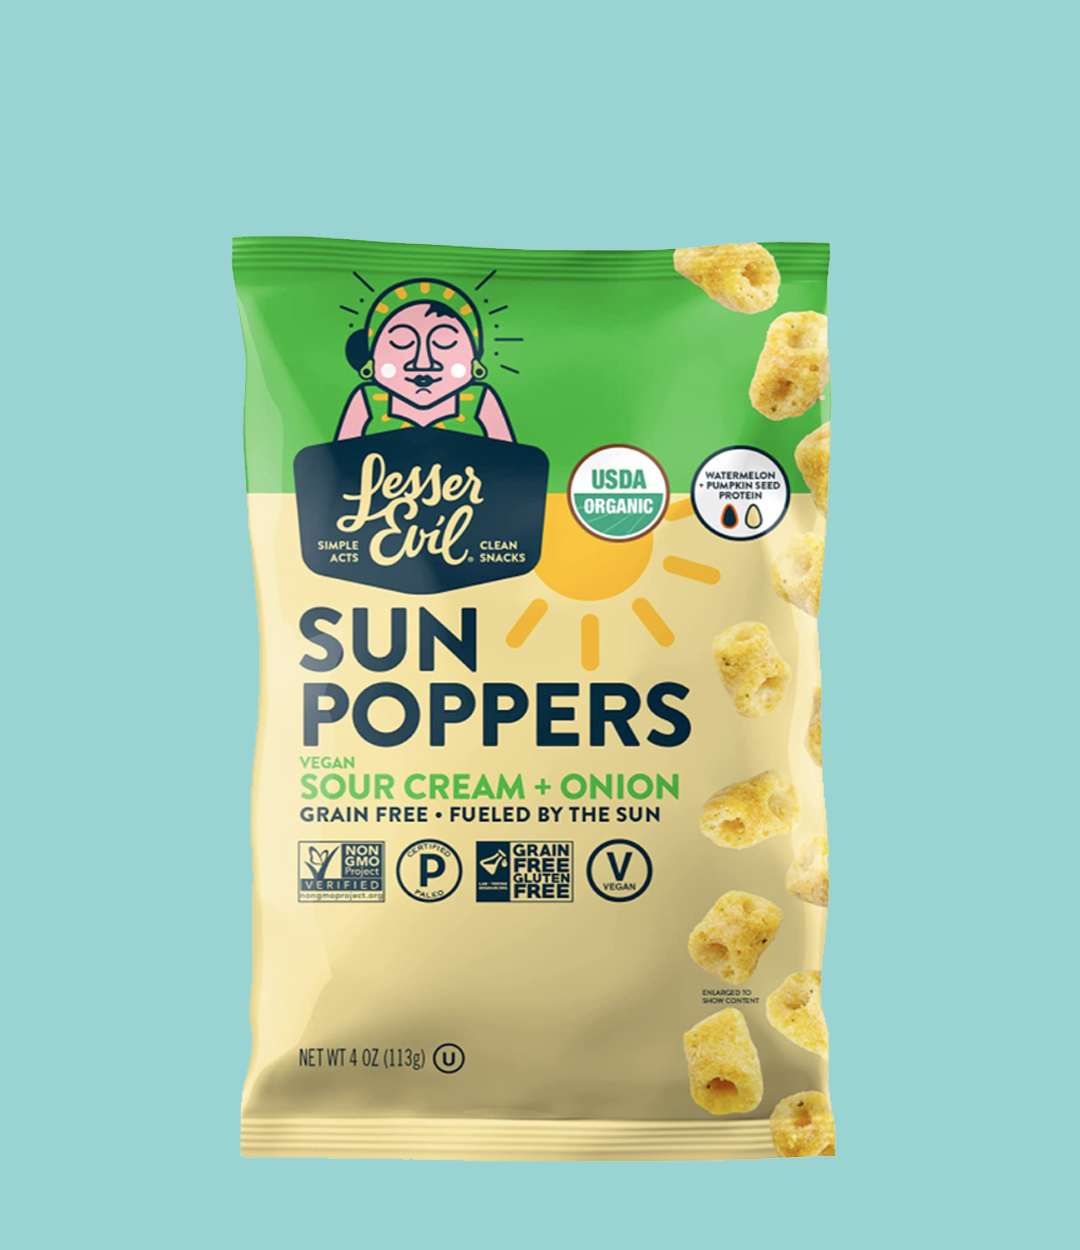 Sour Cream and Onion Sun Poppers